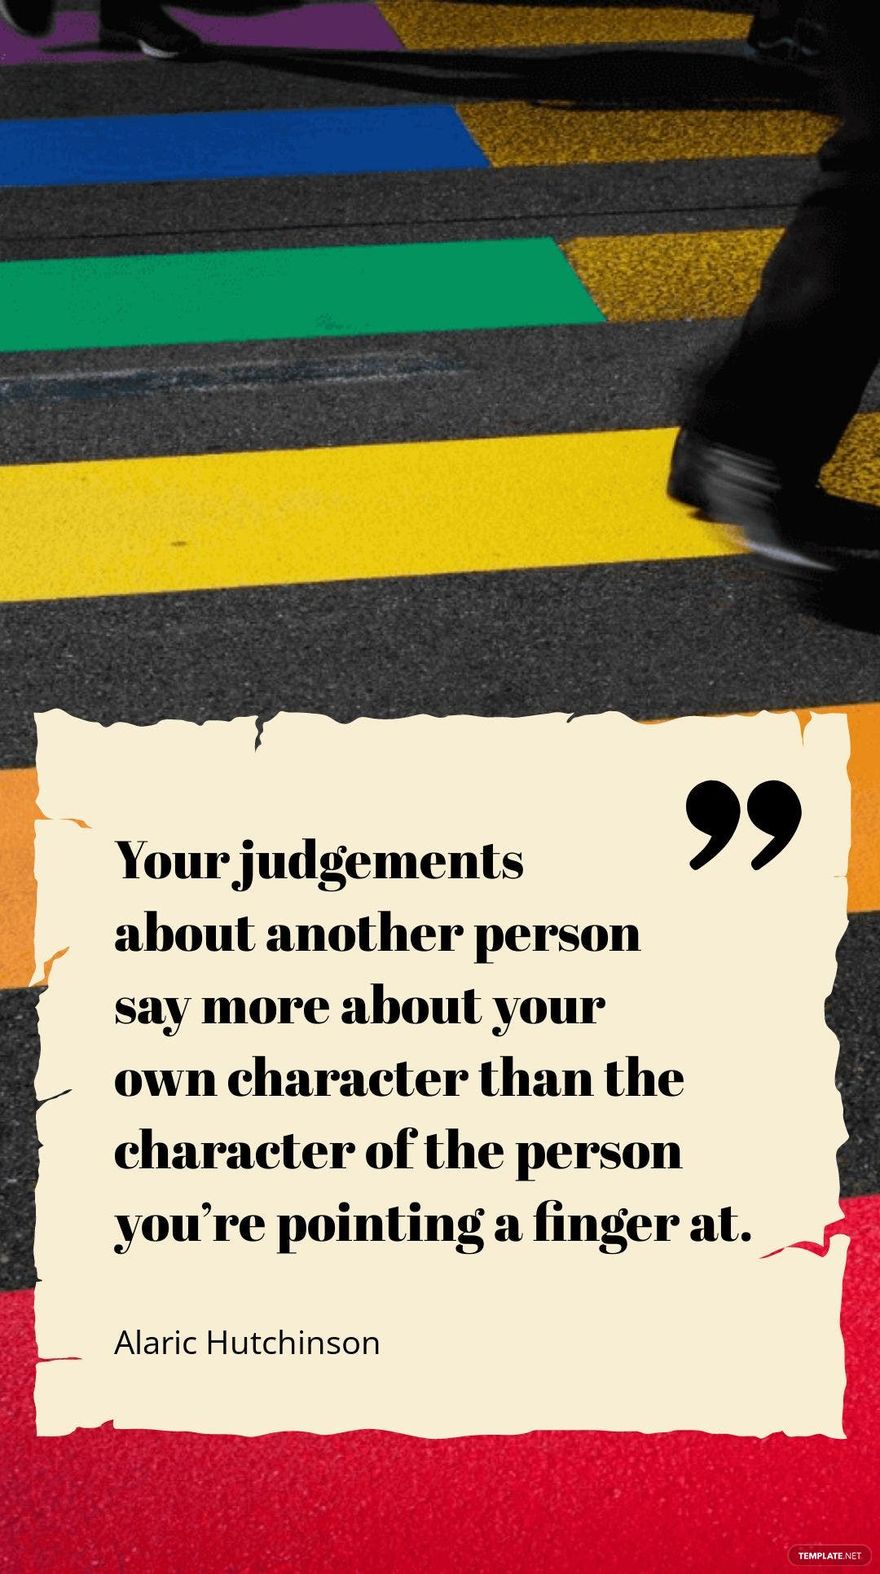 Alaric Hutchinson - Your judgements about another person say more about your own character than the character of the person you’re pointing a finger at.